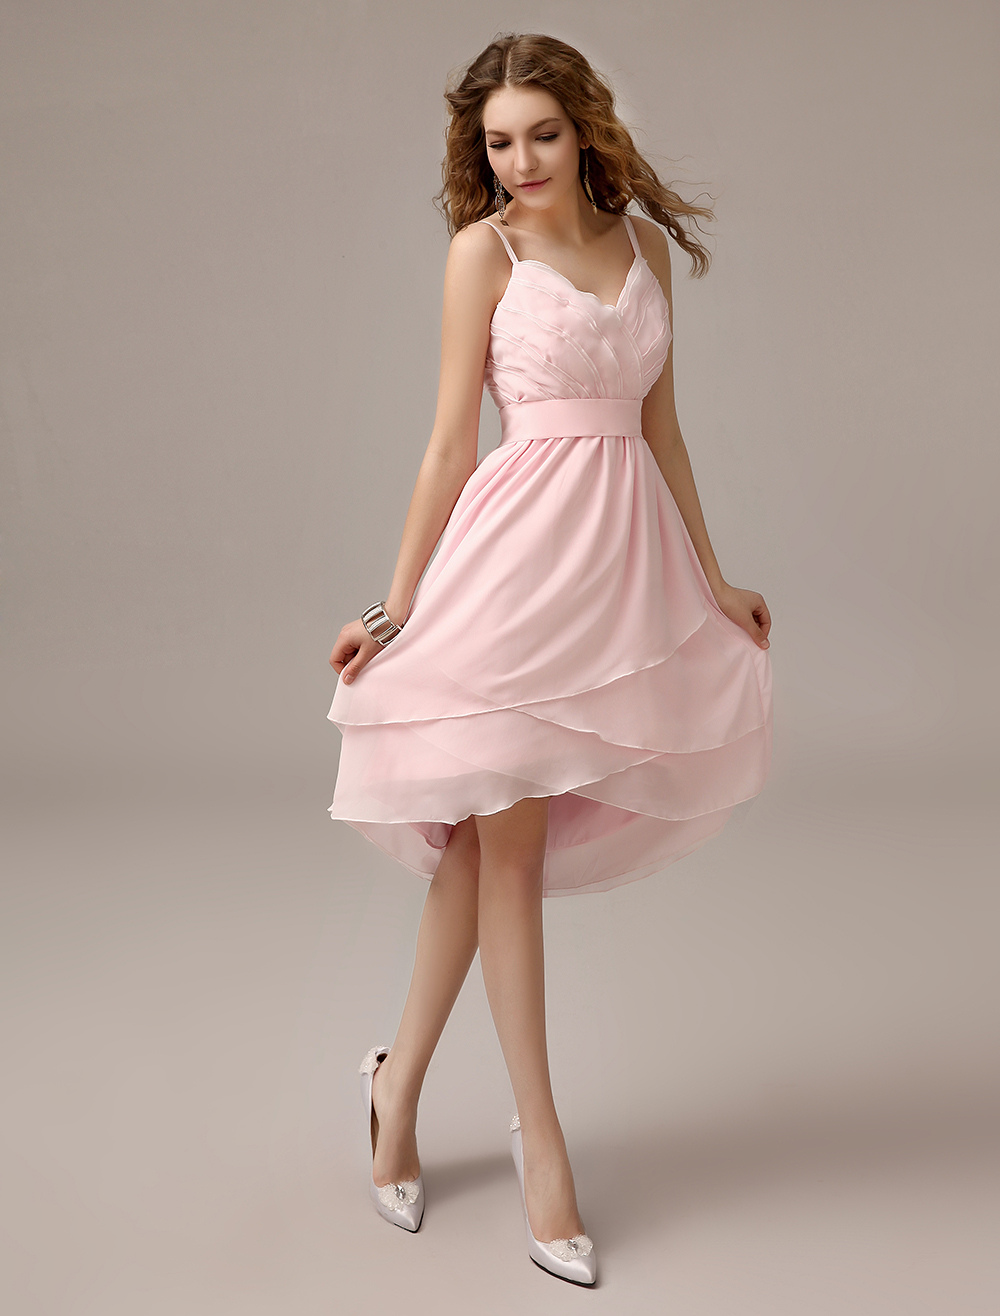 Asymmetrical Blush Pink A Line Ruched Chiffon Bridesmaid Dress With Straps Neck 8950